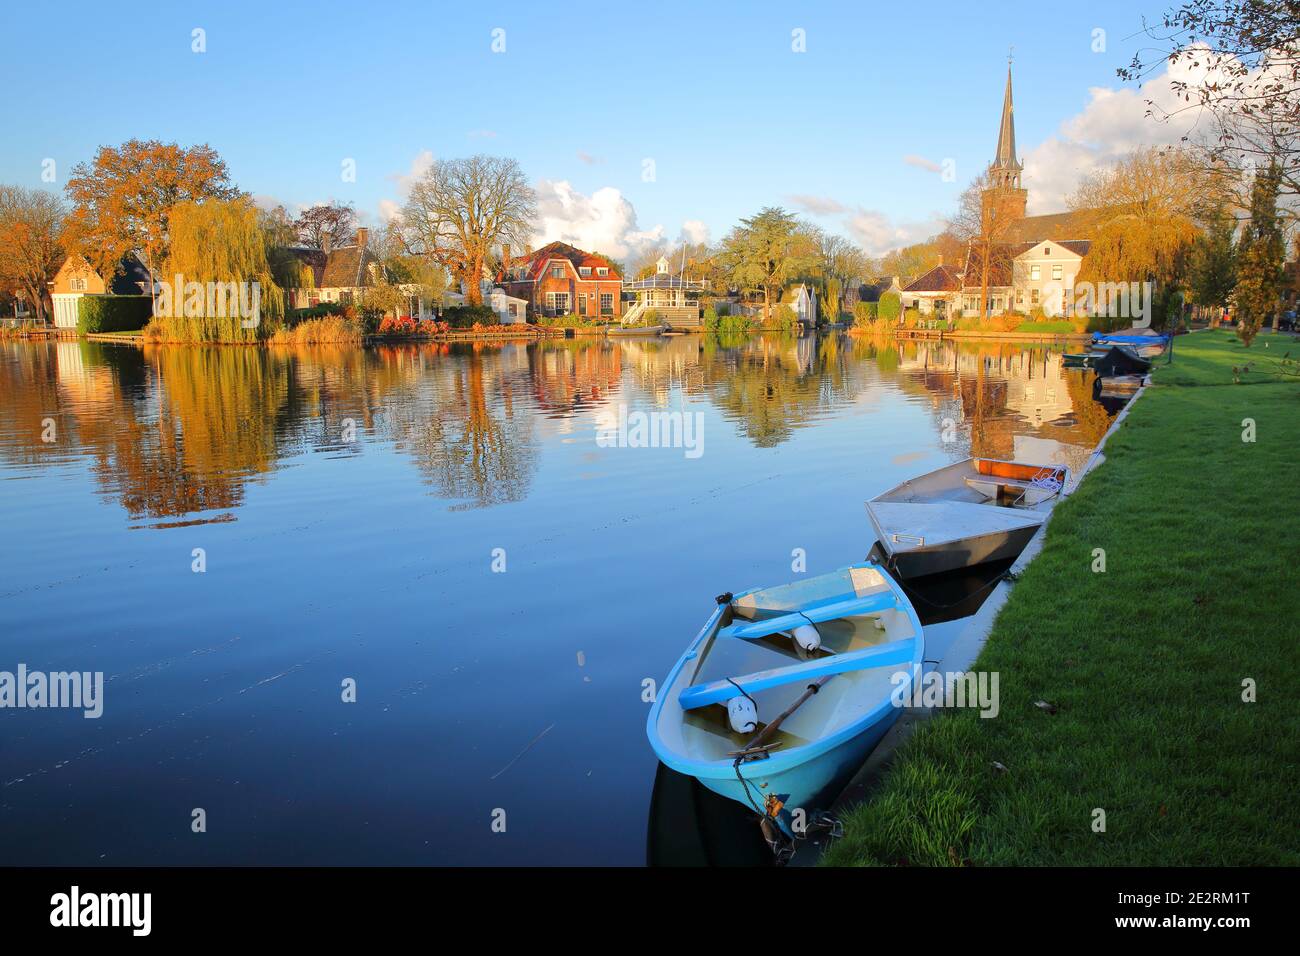 Broek in Waterland, a small town with traditional old and painted wooden houses, North Holland, Netherlands, with reflections of the houses Stock Photo